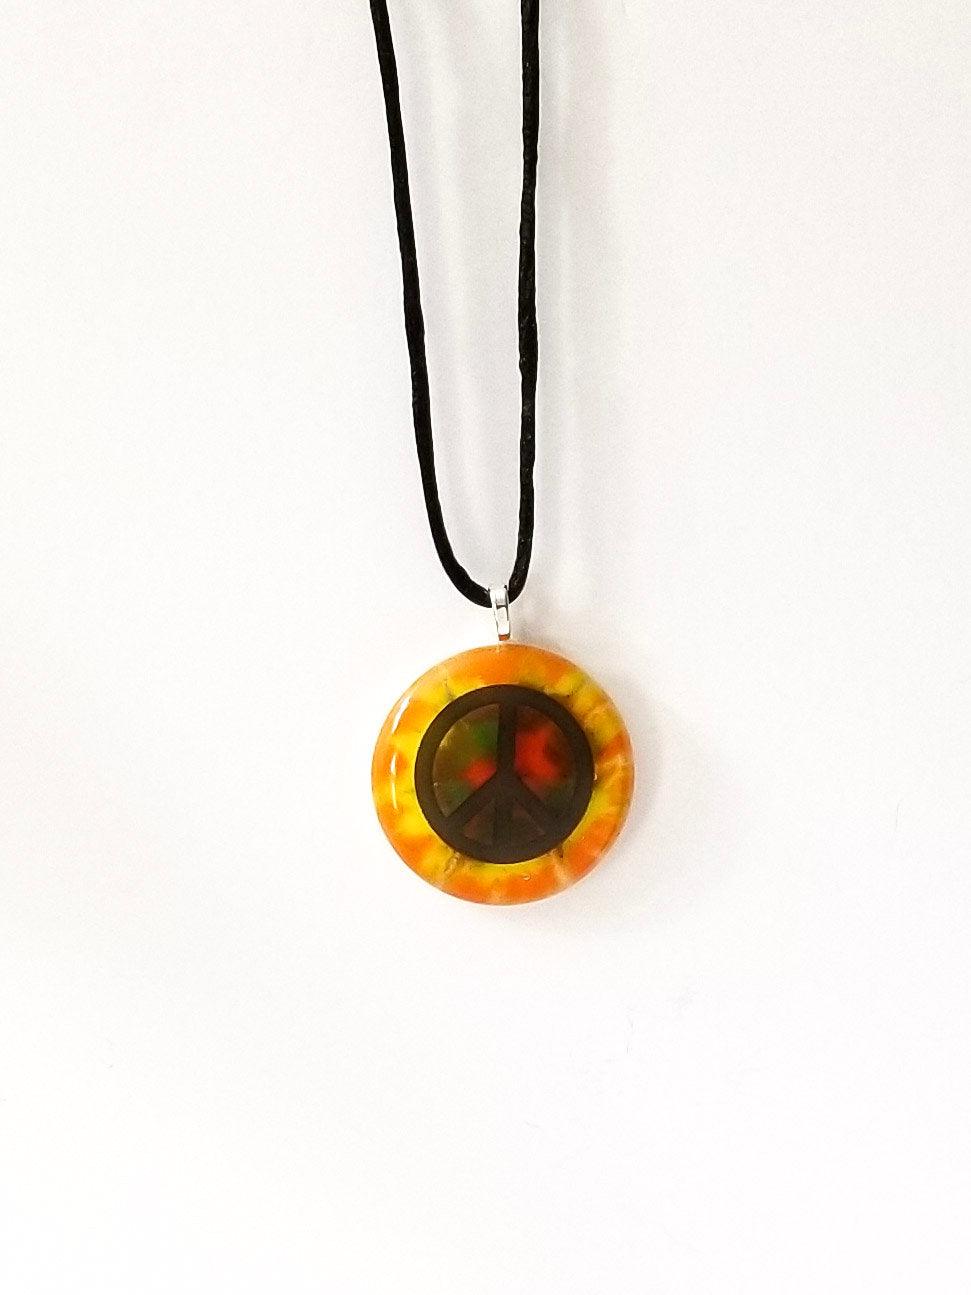 Tie Dye look and Peace Sign fused glass Circle necklace, rainbow color from seeds glassworks